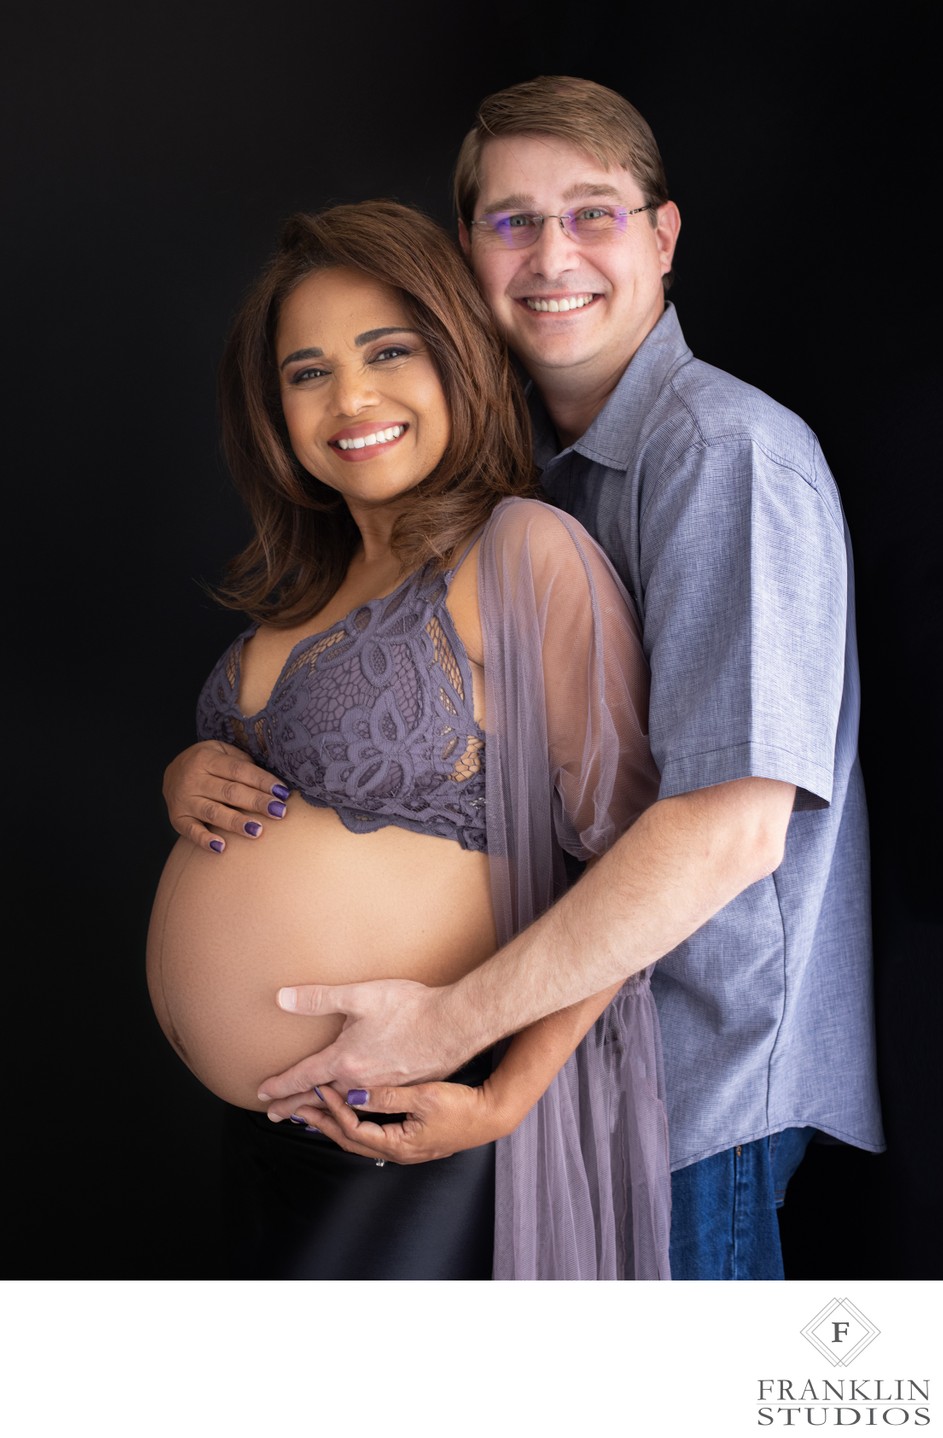 Maternity Photos for Couples